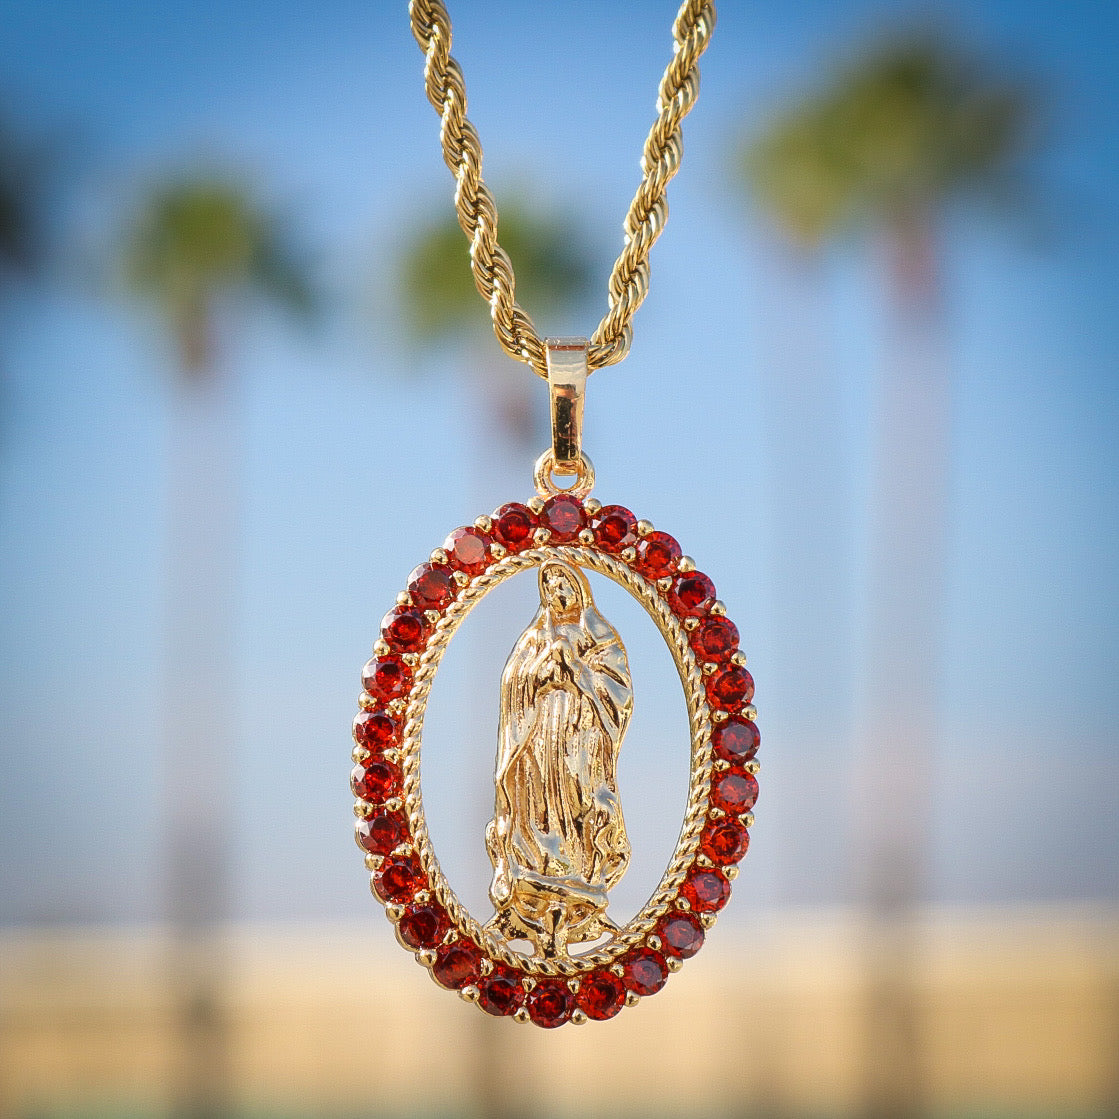 Women’s Virgin Mary Oval Red CZ Necklace